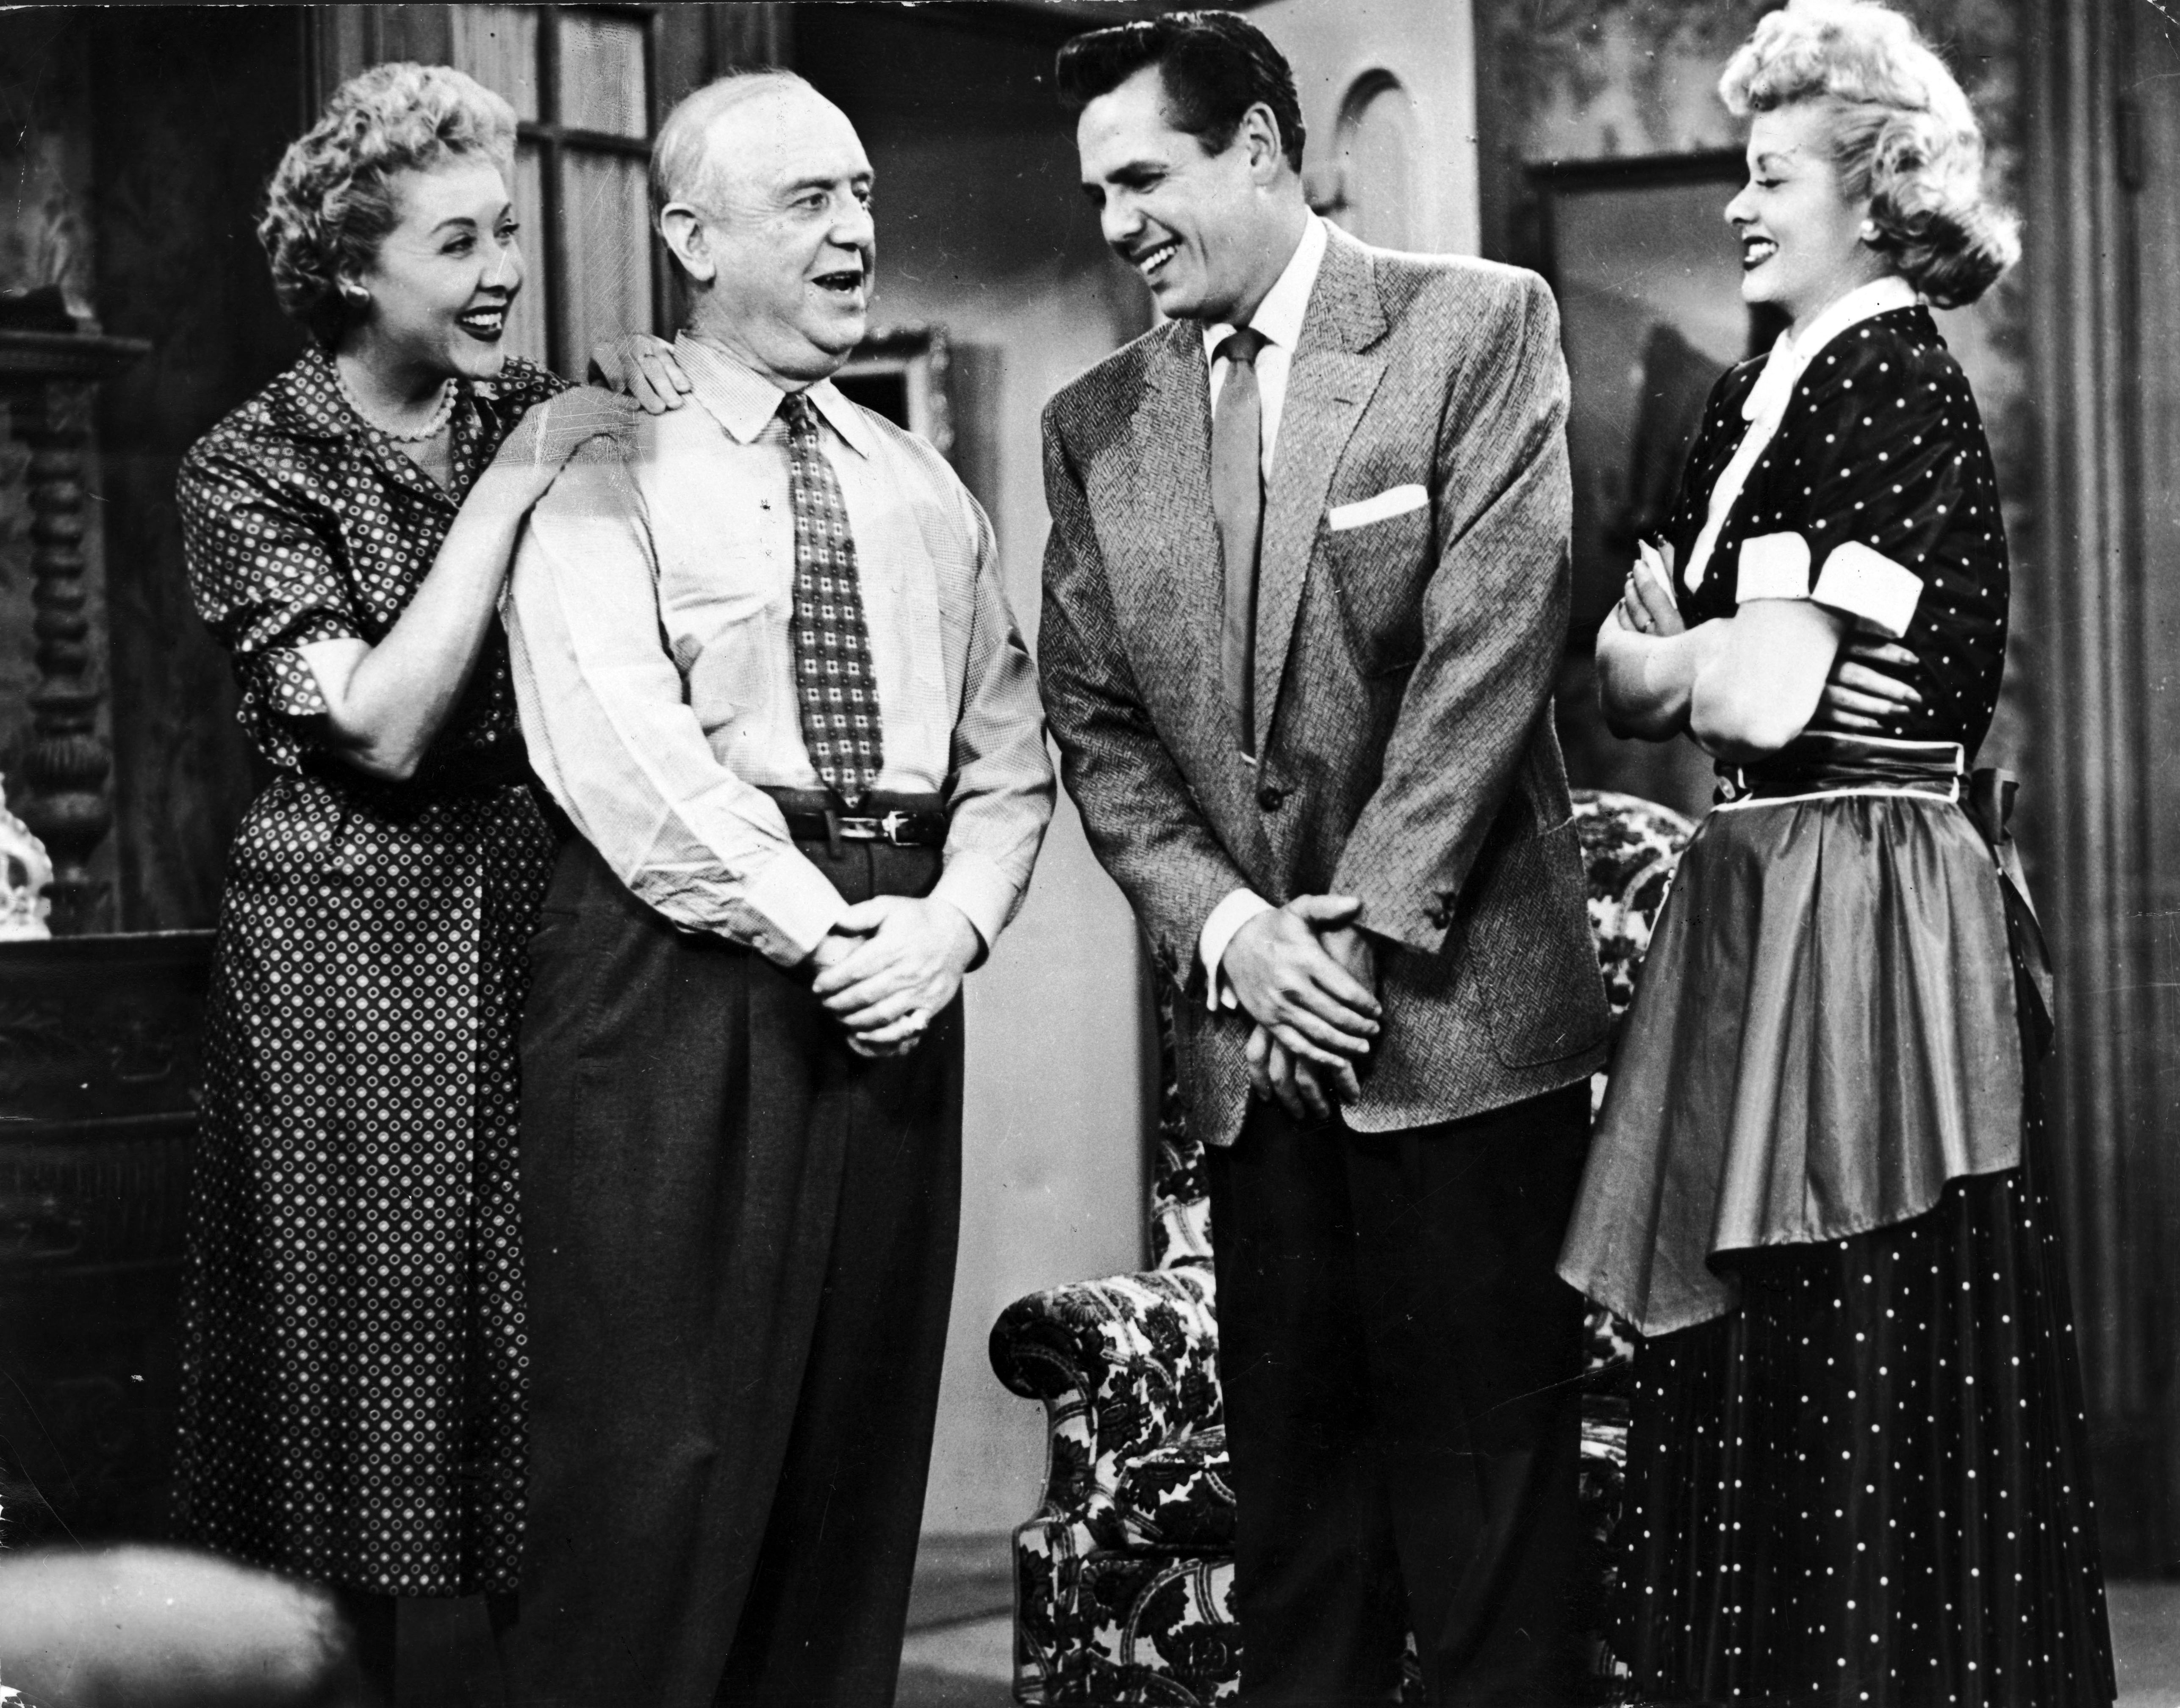 Still of Lucille Ball, Desi Arnaz Jr., William Frawley and Vivian Vance in I Love Lucy (1951)